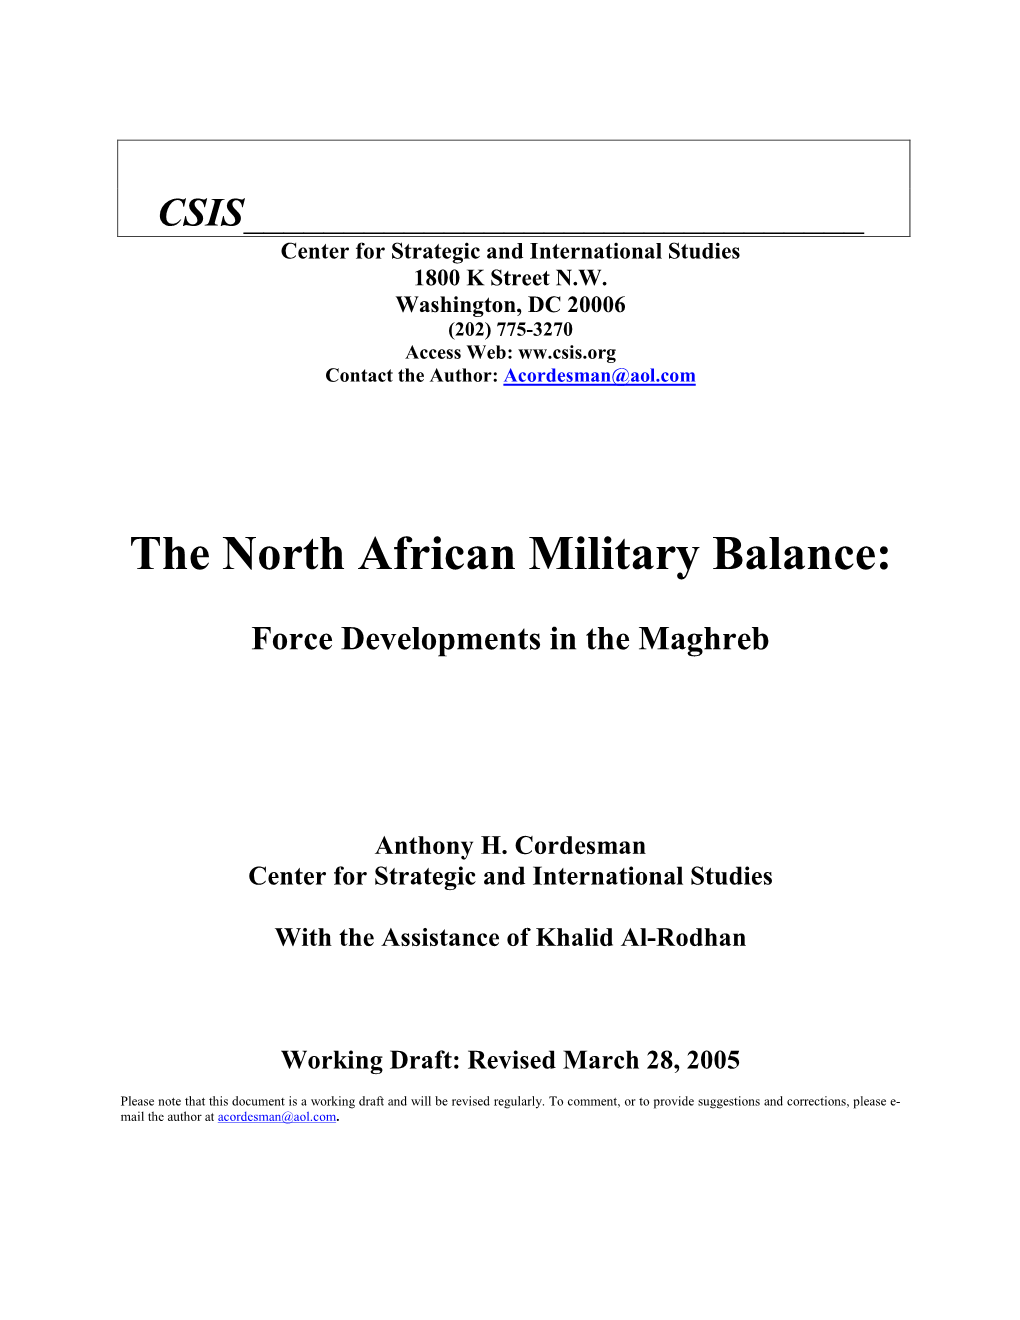 The North African Military Balance Have Been Erratic at Best